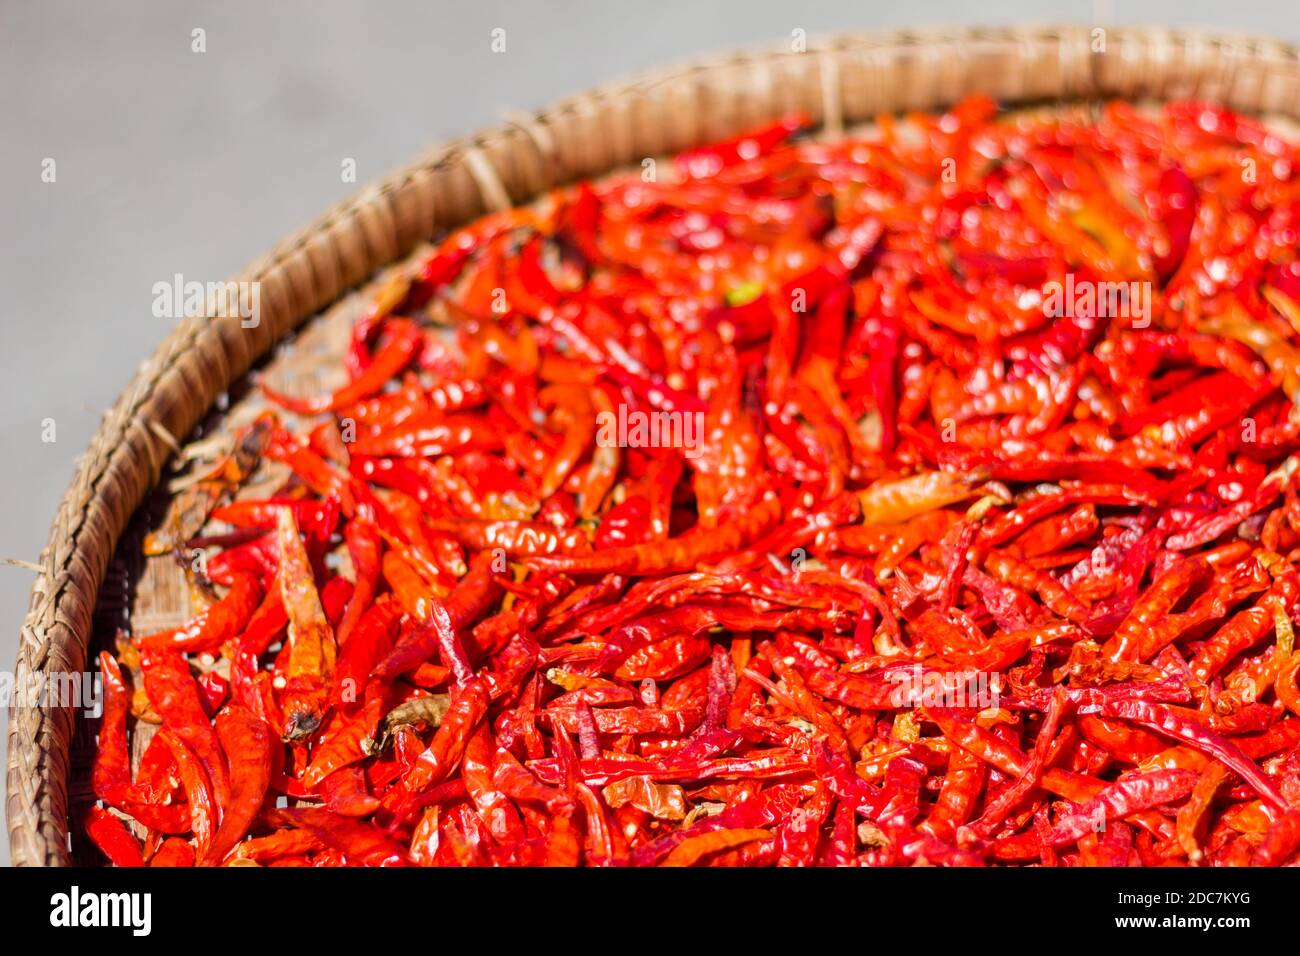 Red chili peppers drying in Phuket, Thailand Stock Photo